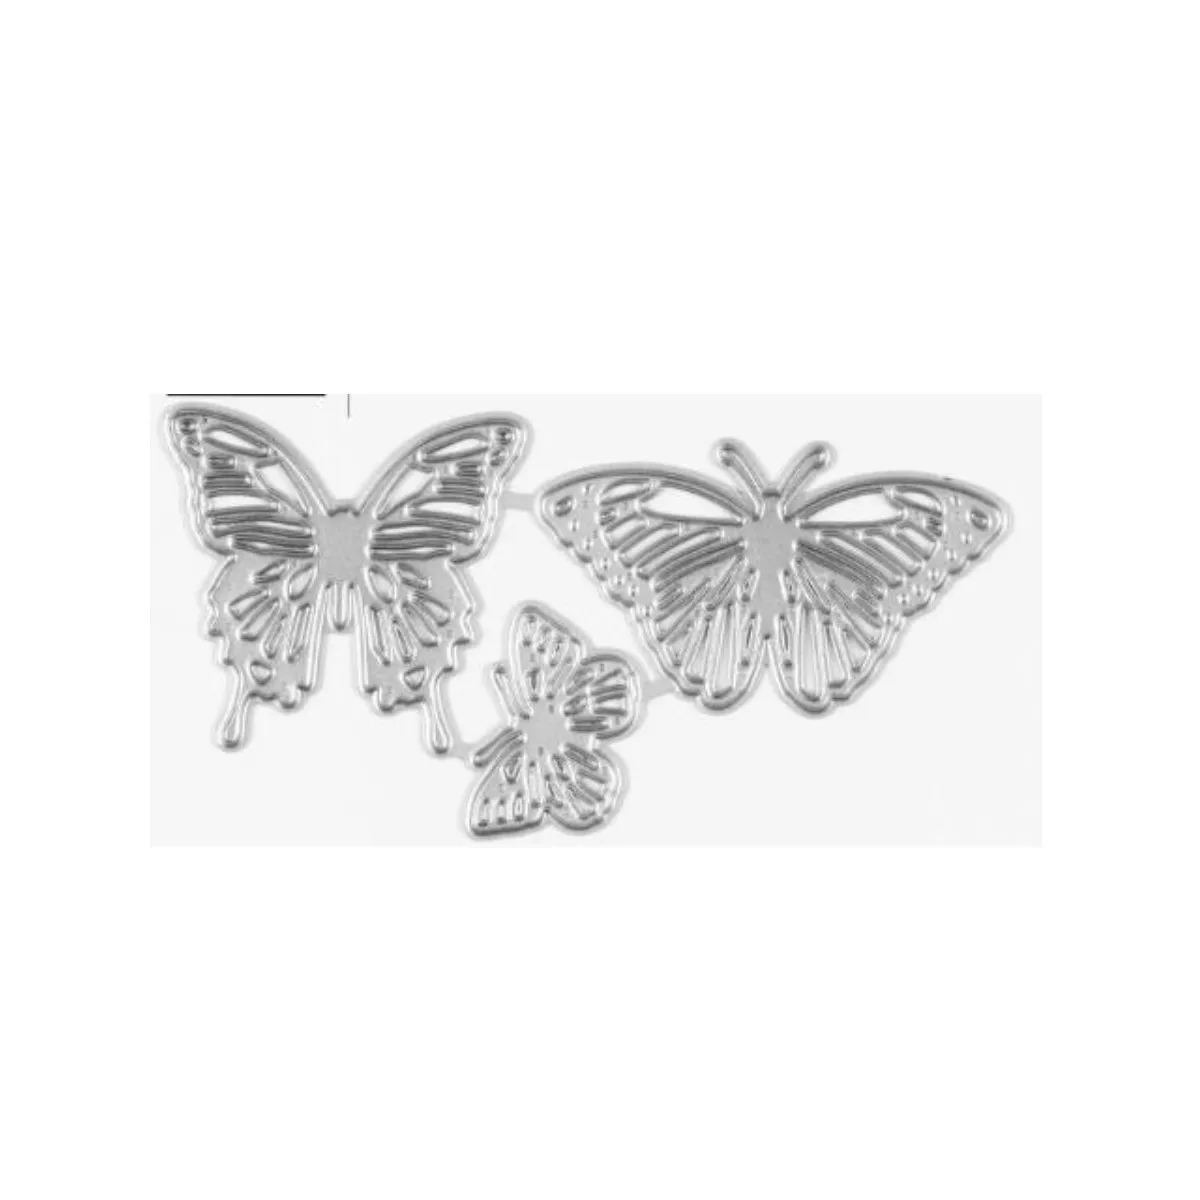 

Three Butterflies Metal Cutting Dies Stamps Scrapbook Diary Secoration Embossing Stencil Template Diy Greeting Card Handmade